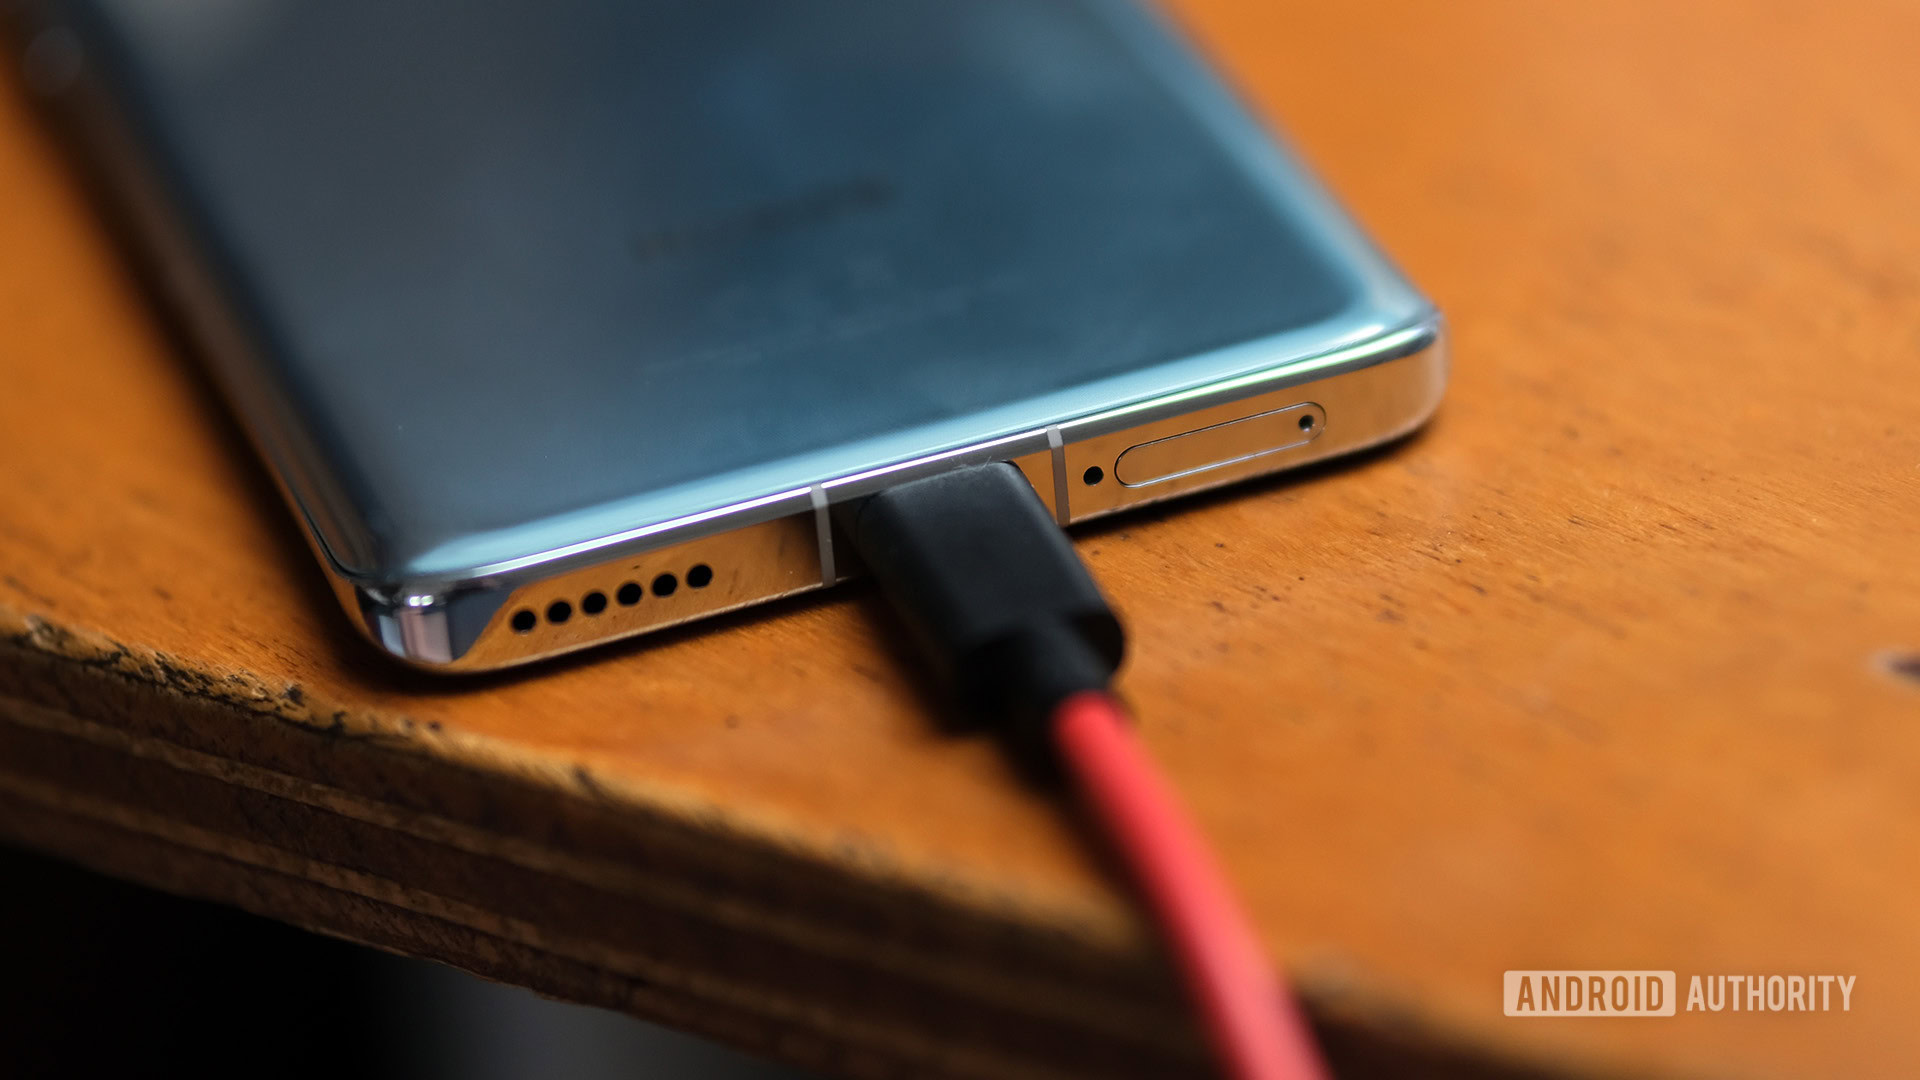 USB C cable port for wired charging